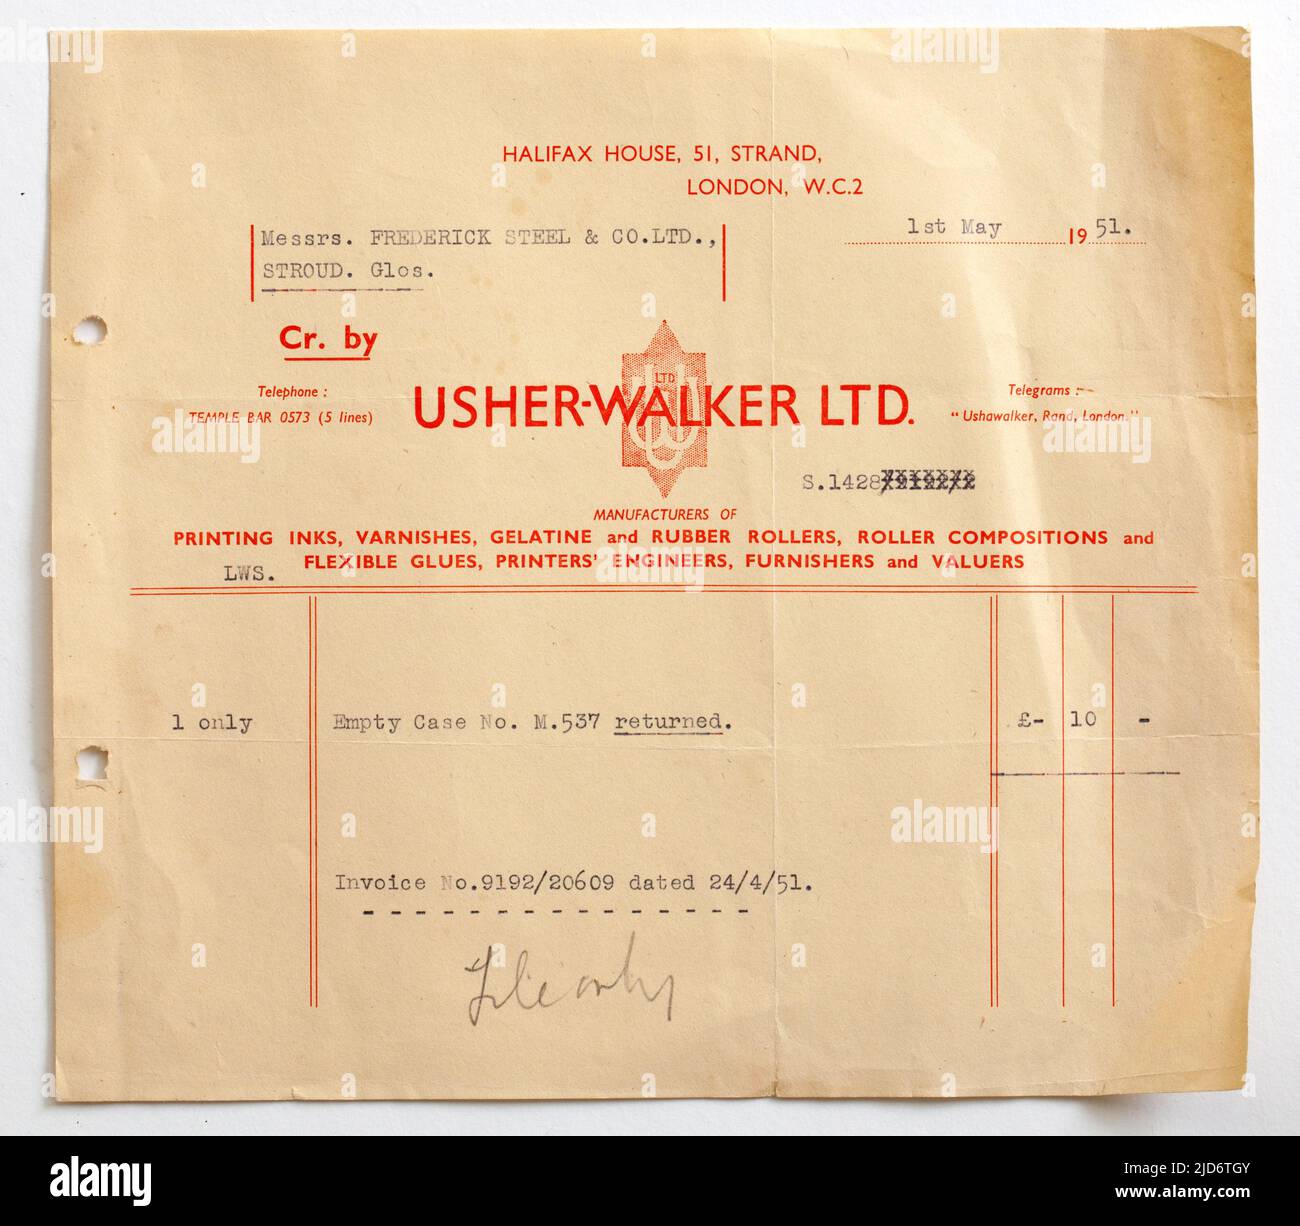 1950s Business Sales Invoice Receipt for Supplies from Usher Walker Ltd Stock Photo